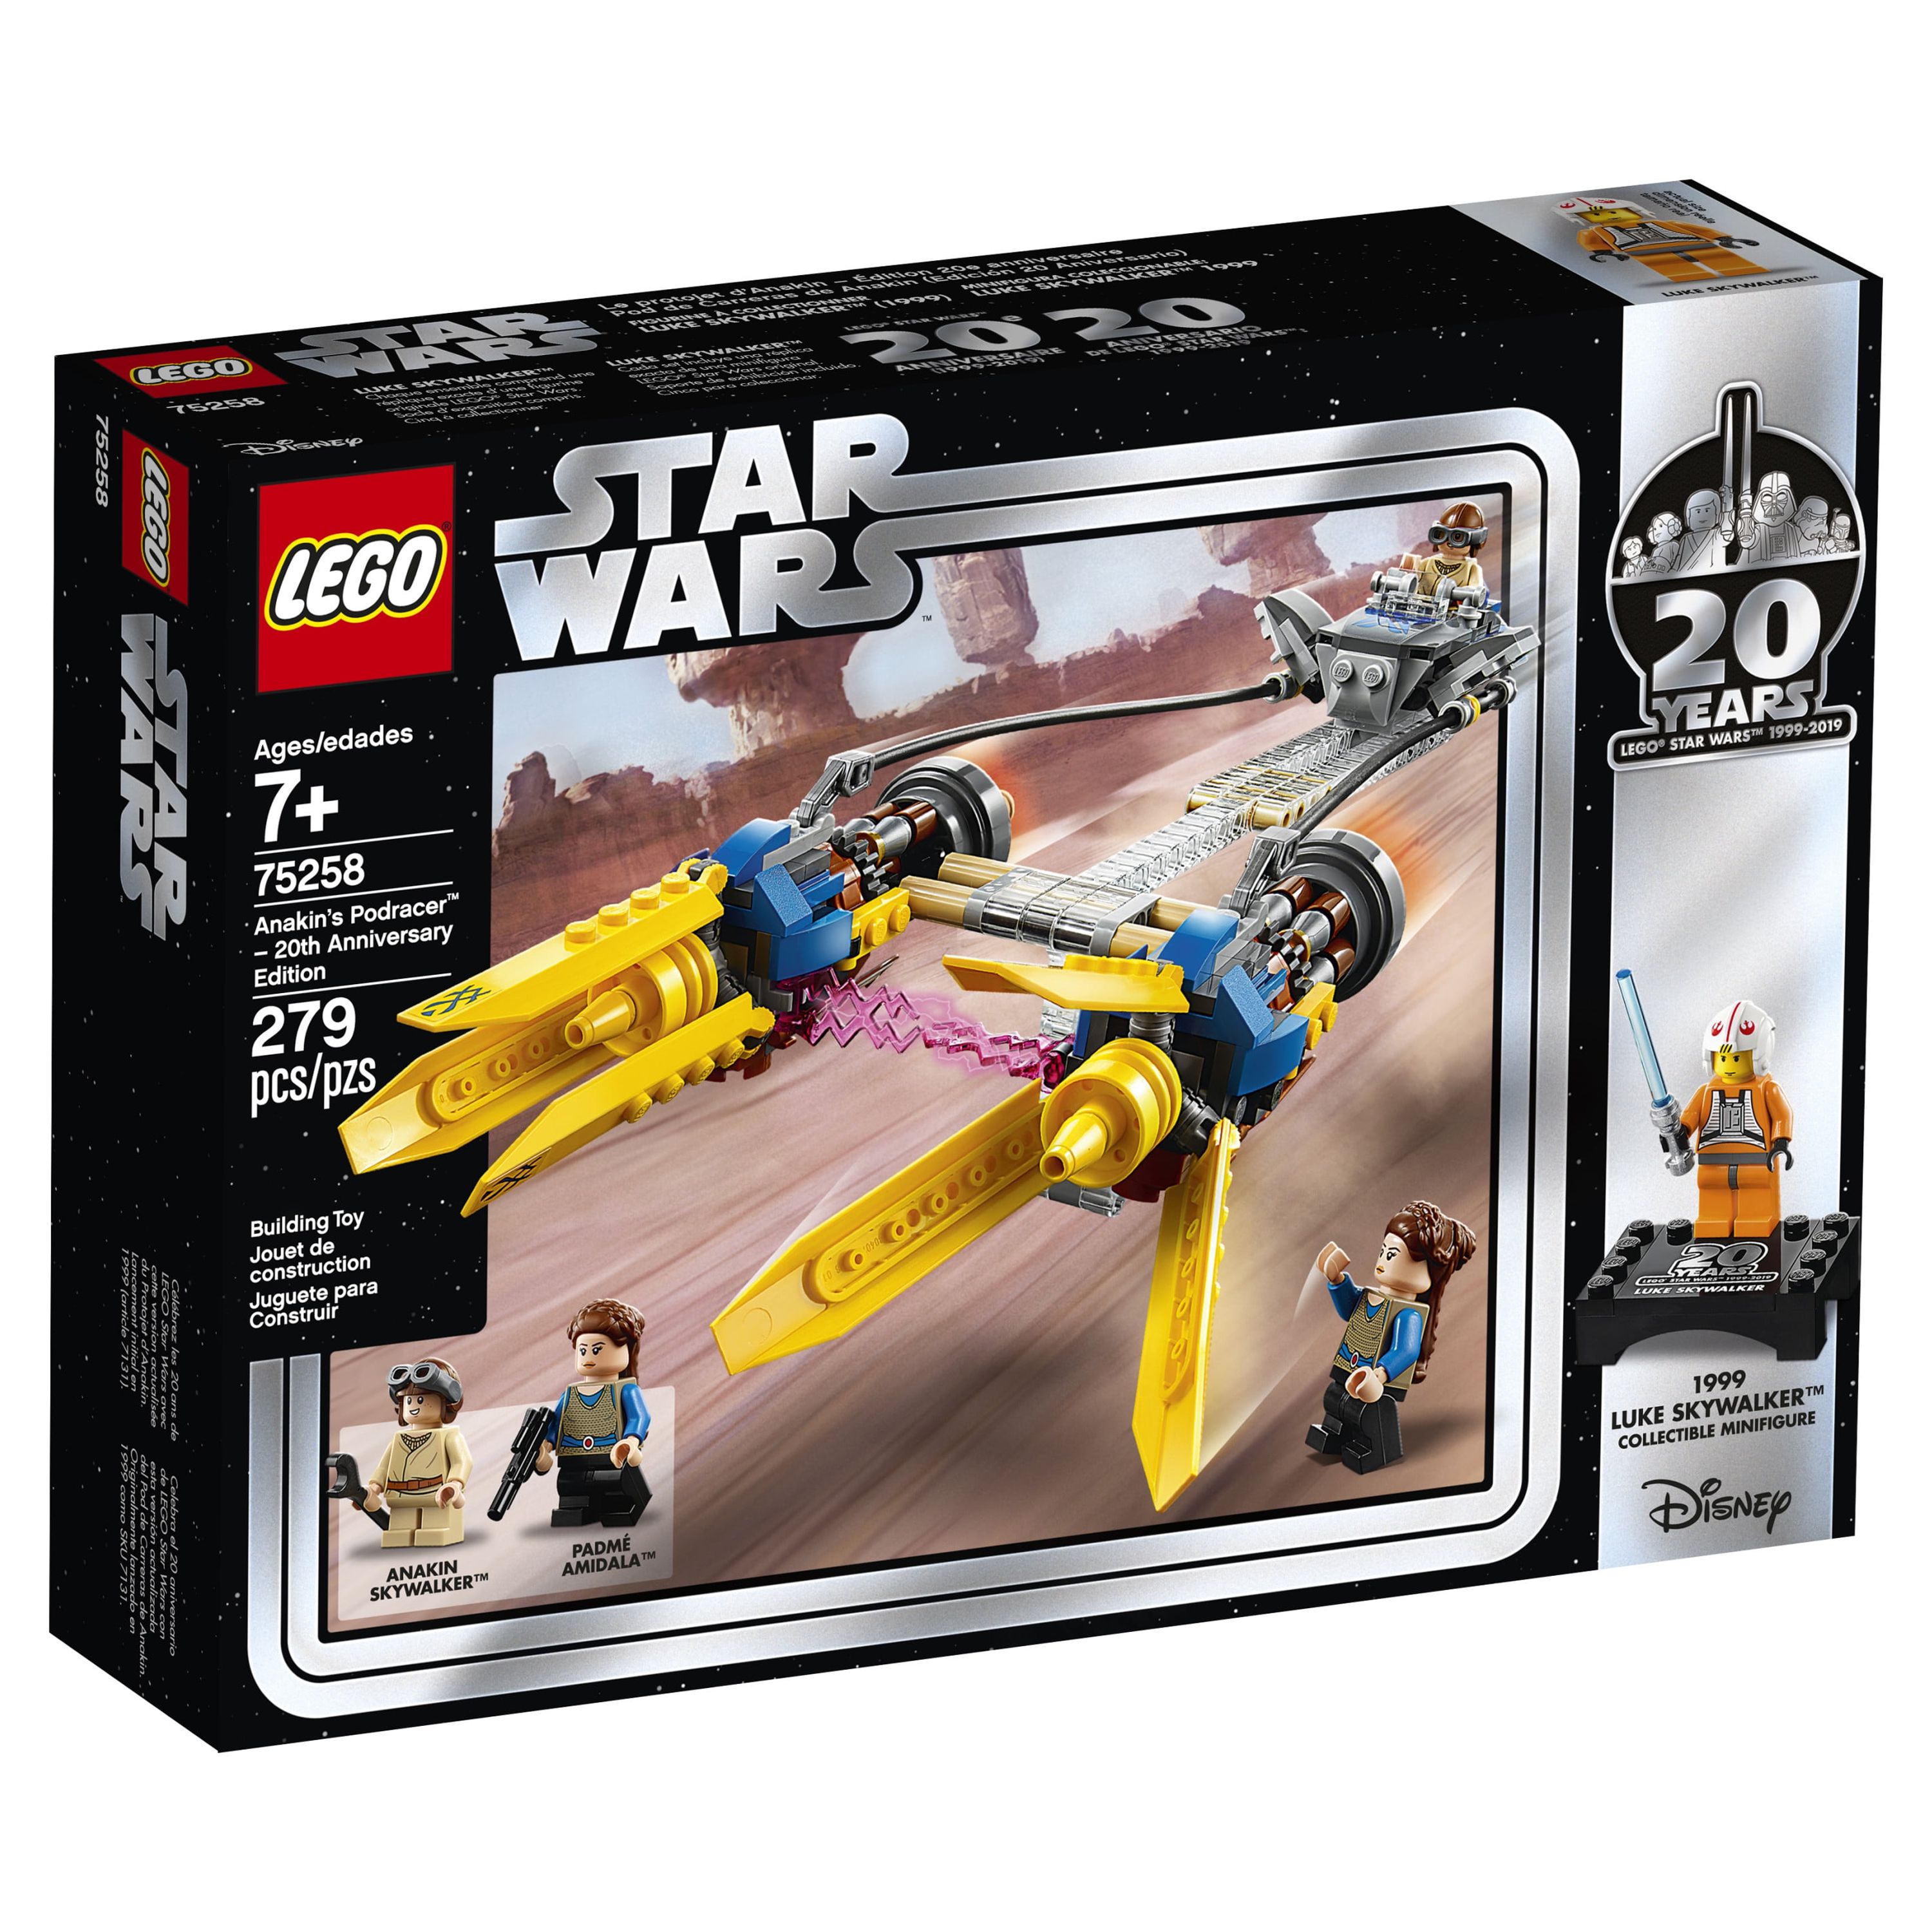 LEGO Star Wars 20th Anniversary Edition Anakin's Podracer Vehicle Building Set 75258 - image 5 of 6